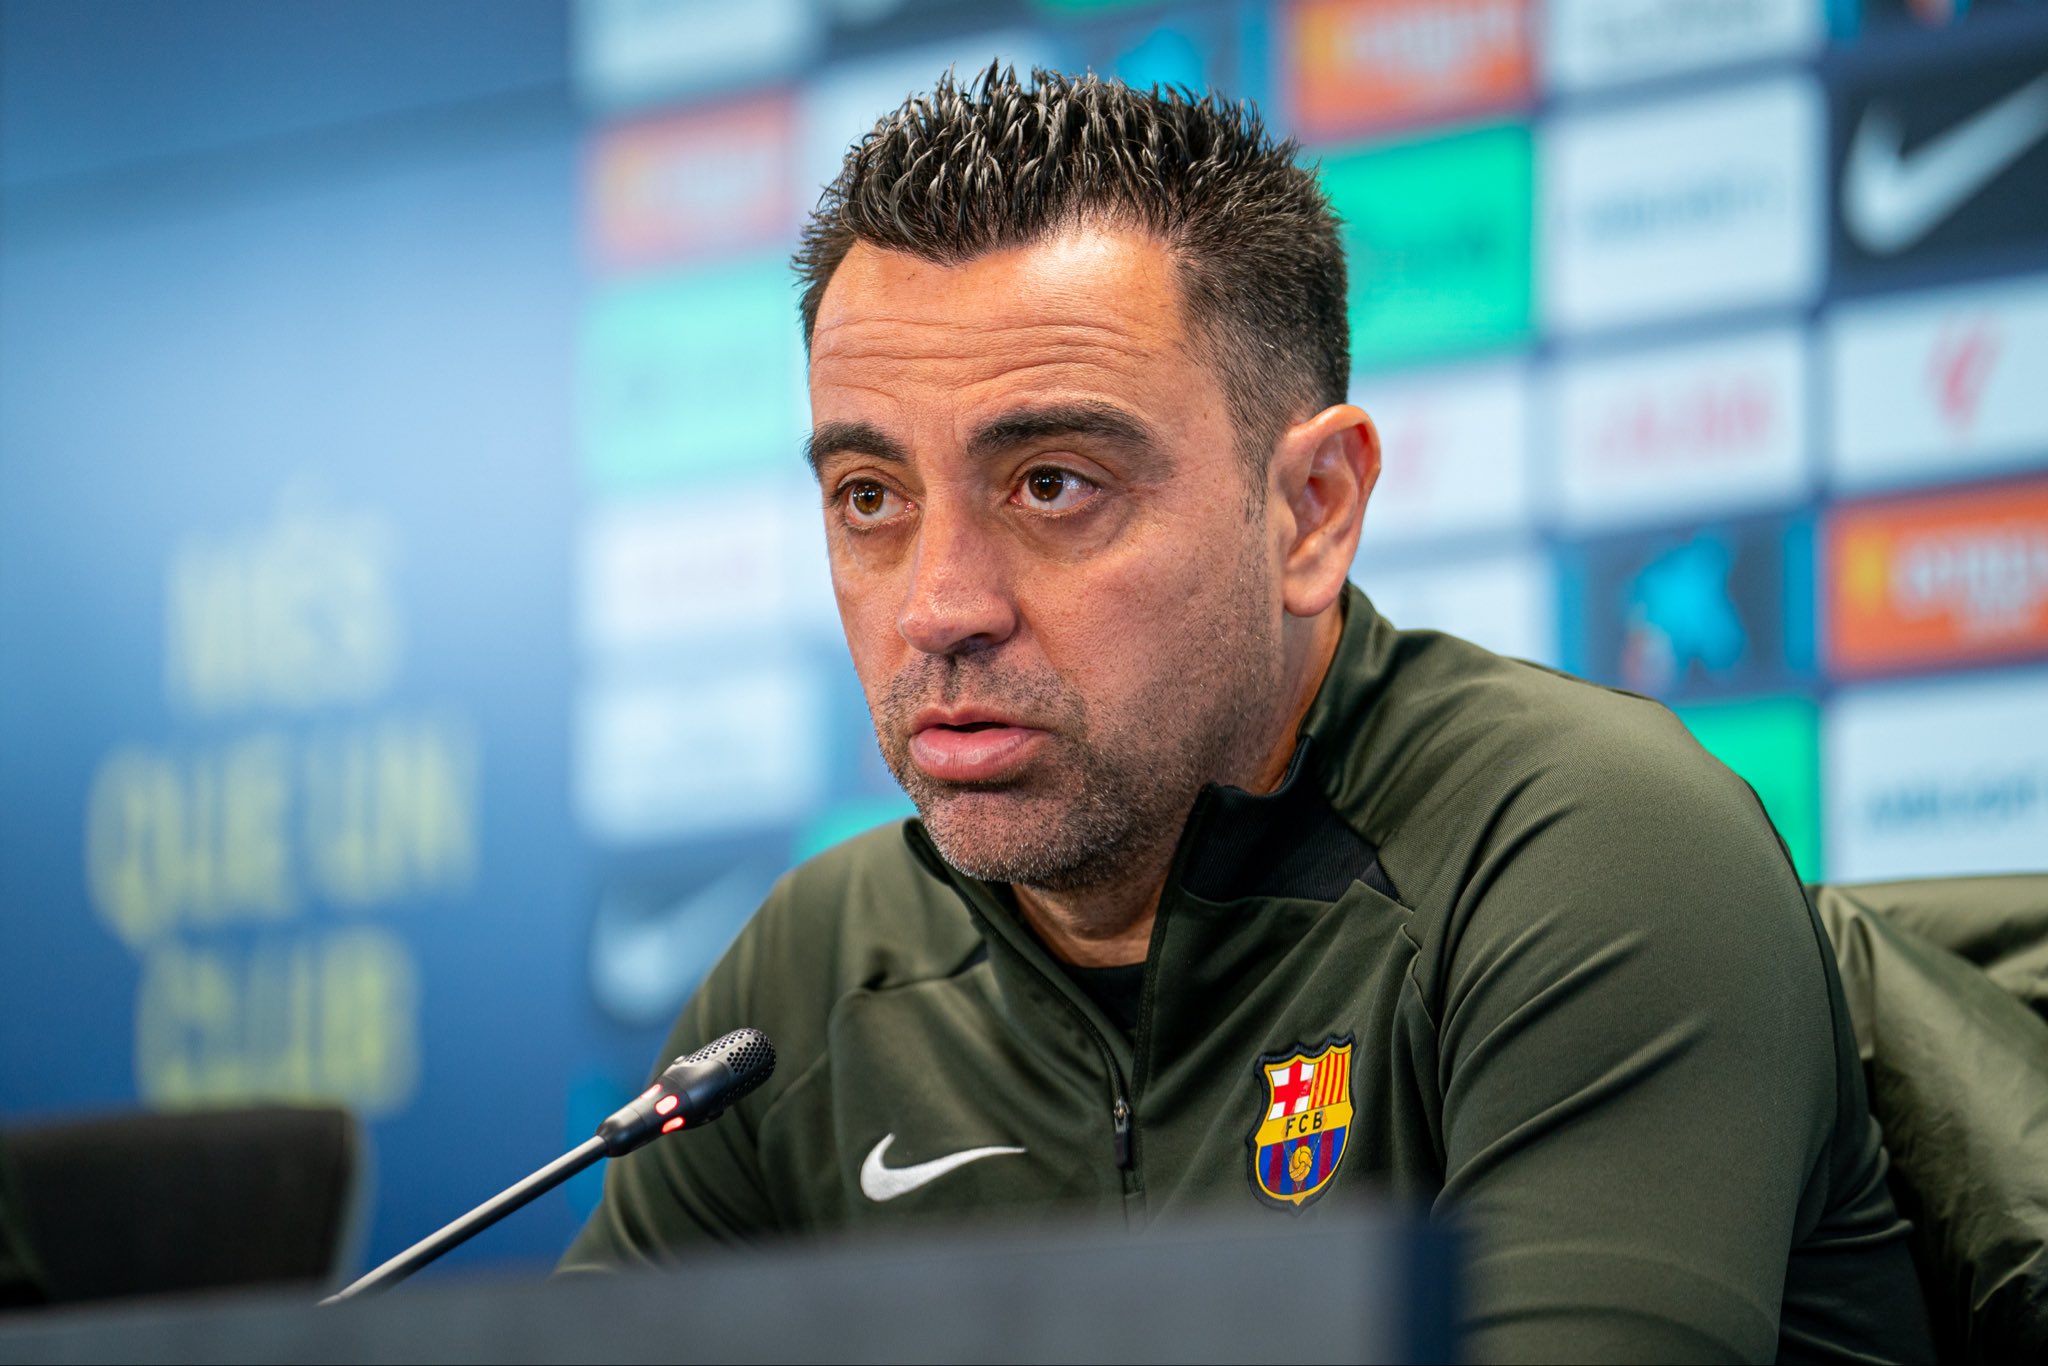 “Nothing is changing” – Xavi Hernandez has no intention of reversing decision to leave Barcelona